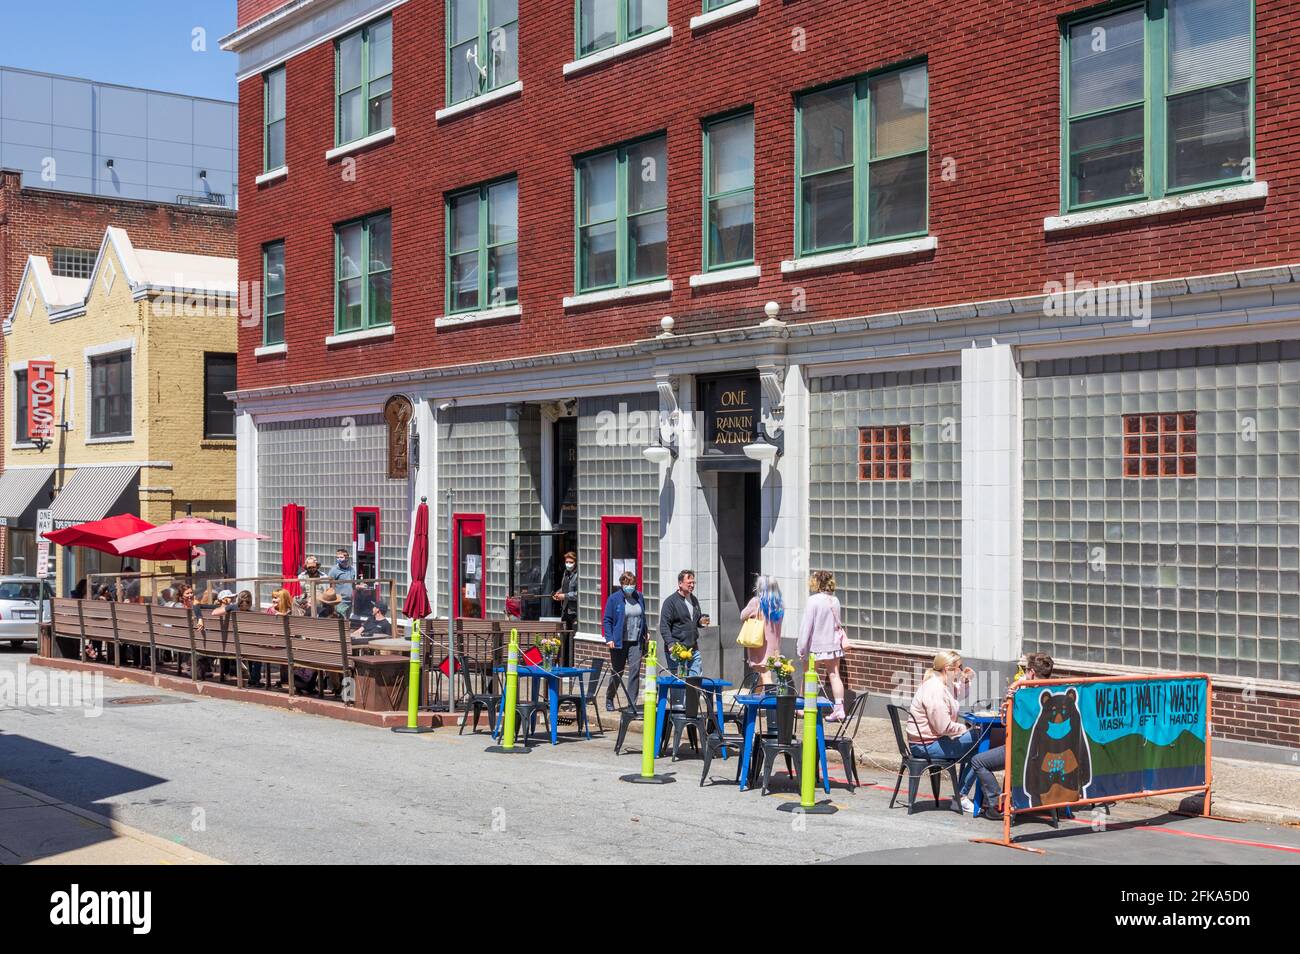 ASHEVILLE, NC, USA-25 APRIL 2021: Rankin Vault Cocktail Lounge, at One Rankin Avenue, with busy sidewalk seating on a sunny, spring day.  People. Stock Photo